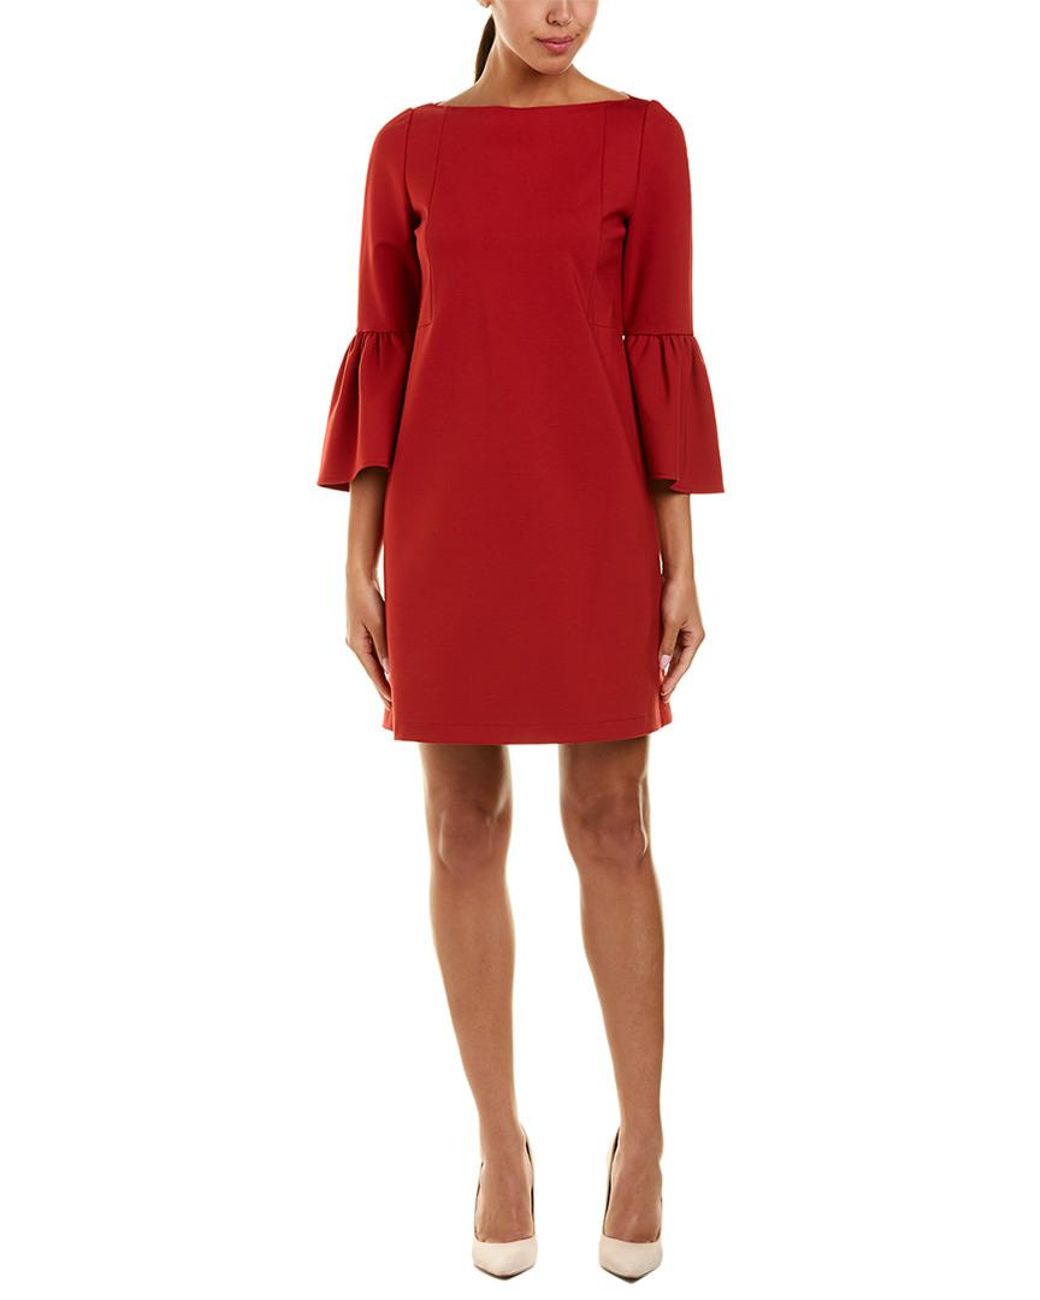 Lafayette 148 New York Synthetic Marissa Shift Dress in Red - Save 50%